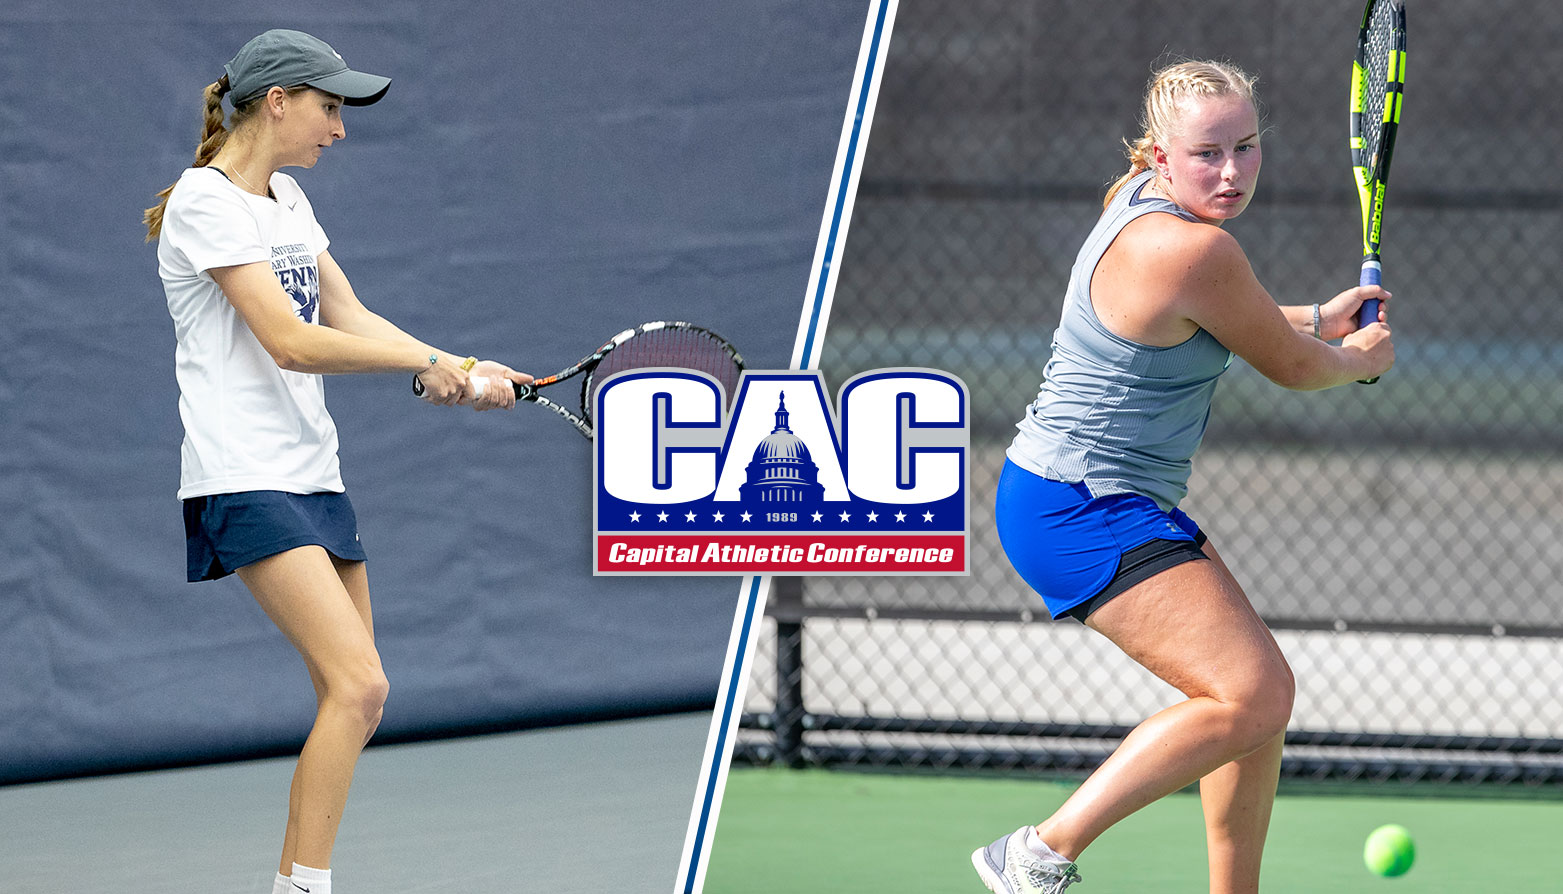 Mary Washington Earns Top CAC Tournament Seed for 13th Straight Year; CAC Women's Tennis Tournament Matchups Set